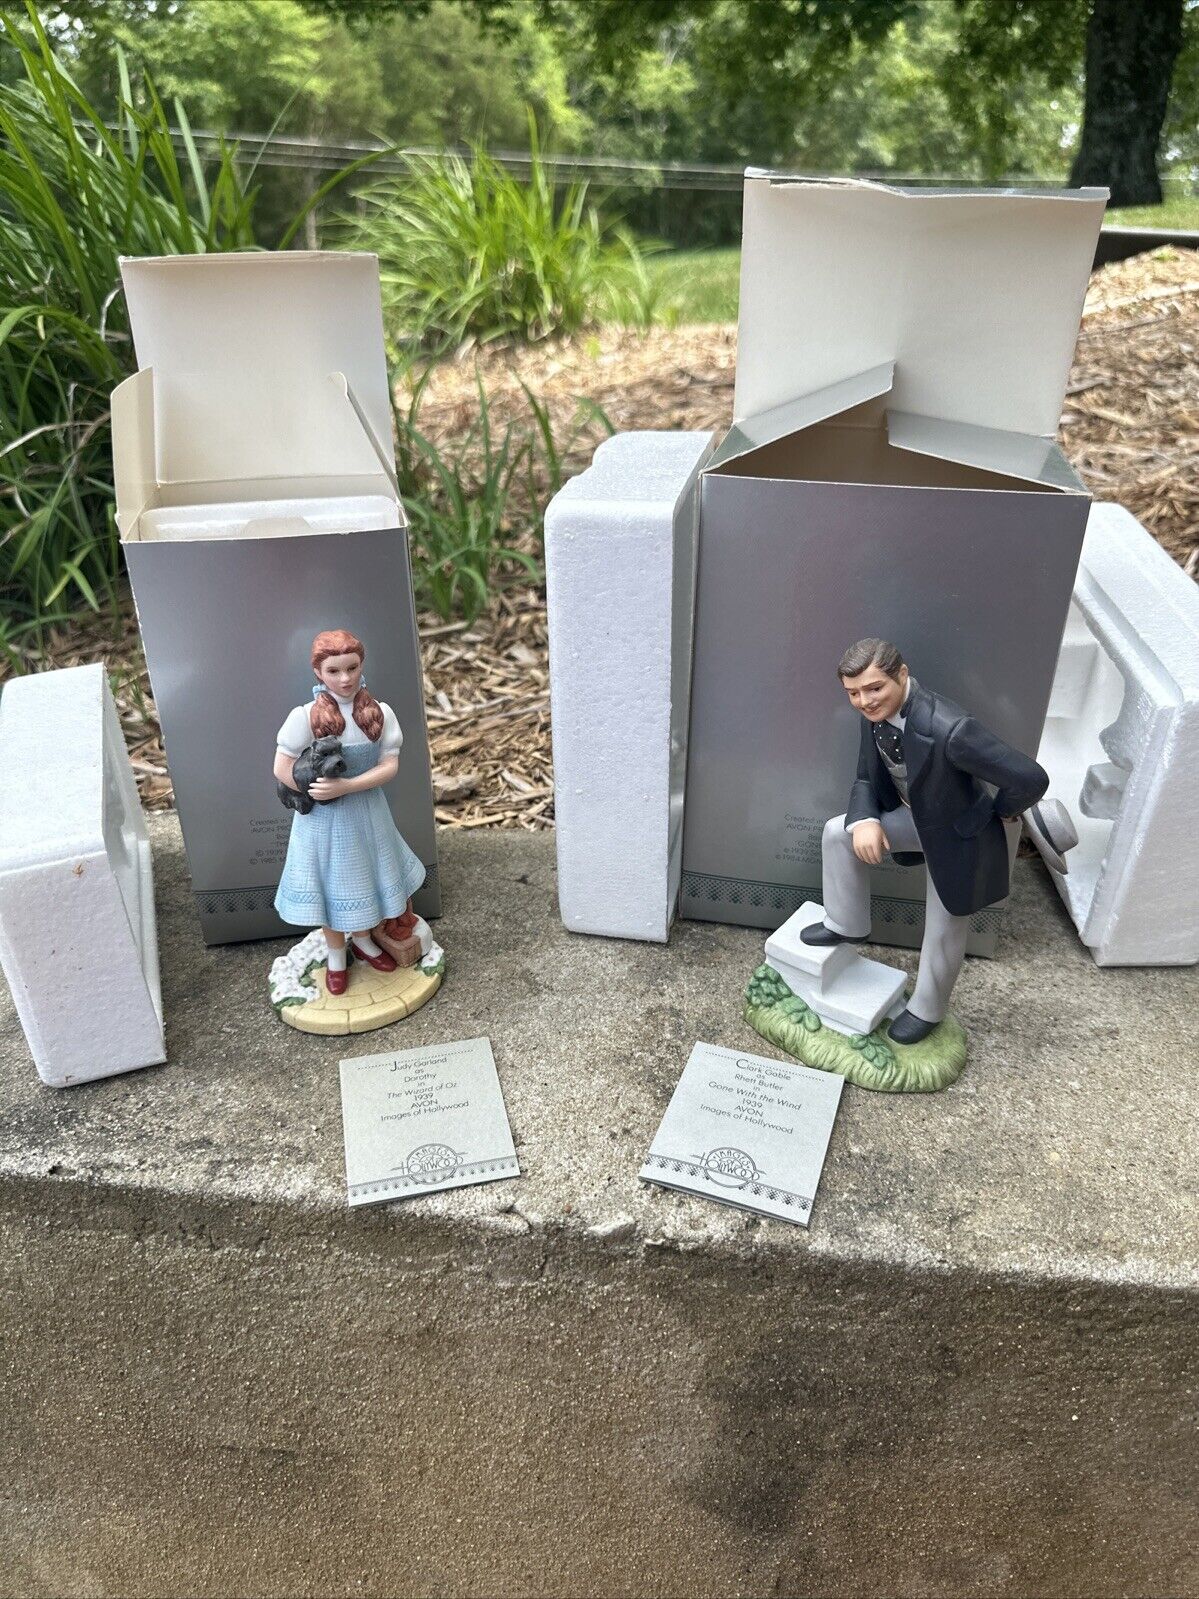 Avon Images Of Hollywood Judy Garland And Clark Gable Porcelain Figures